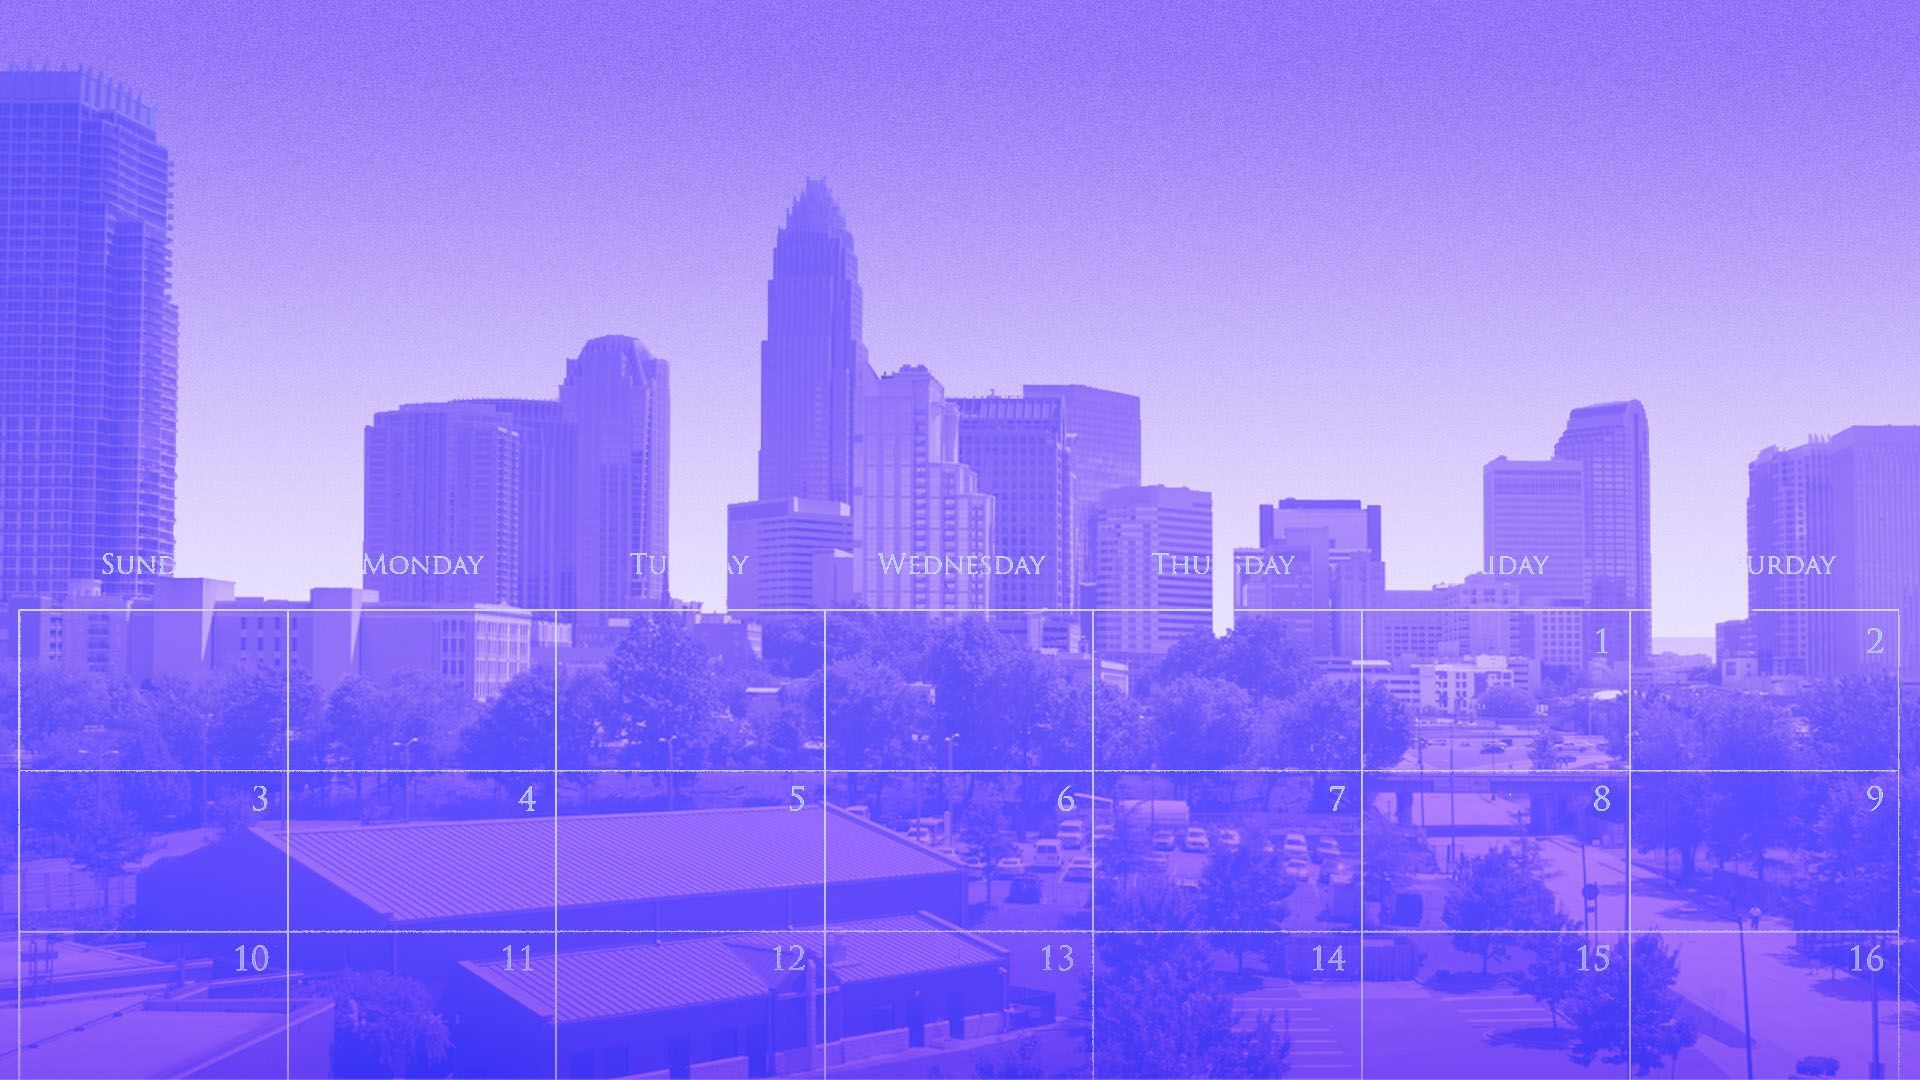 Illustration of the Charlotte skyline with a calendar over it